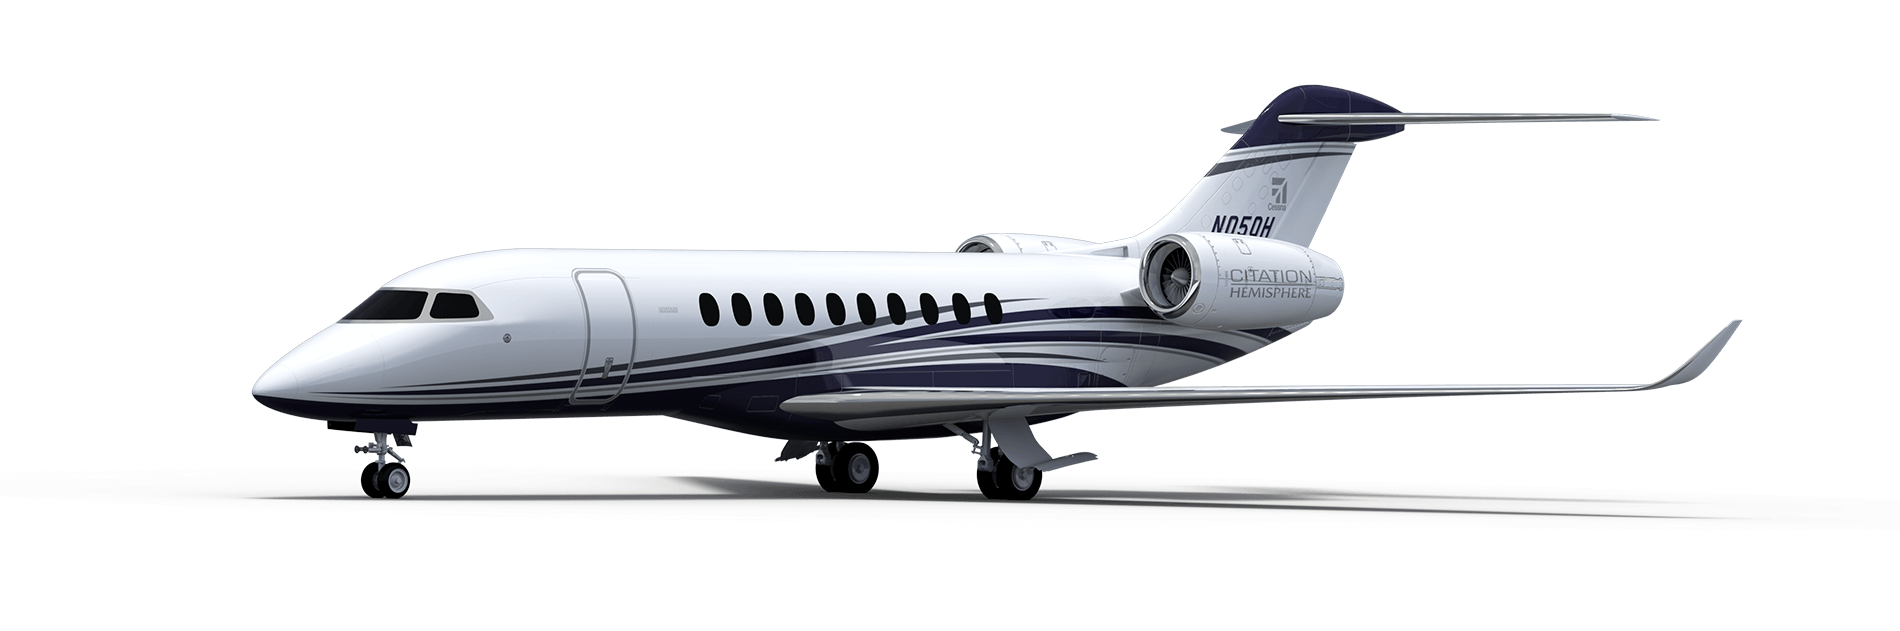 Charter a Heavy Jet like the Challenger 650